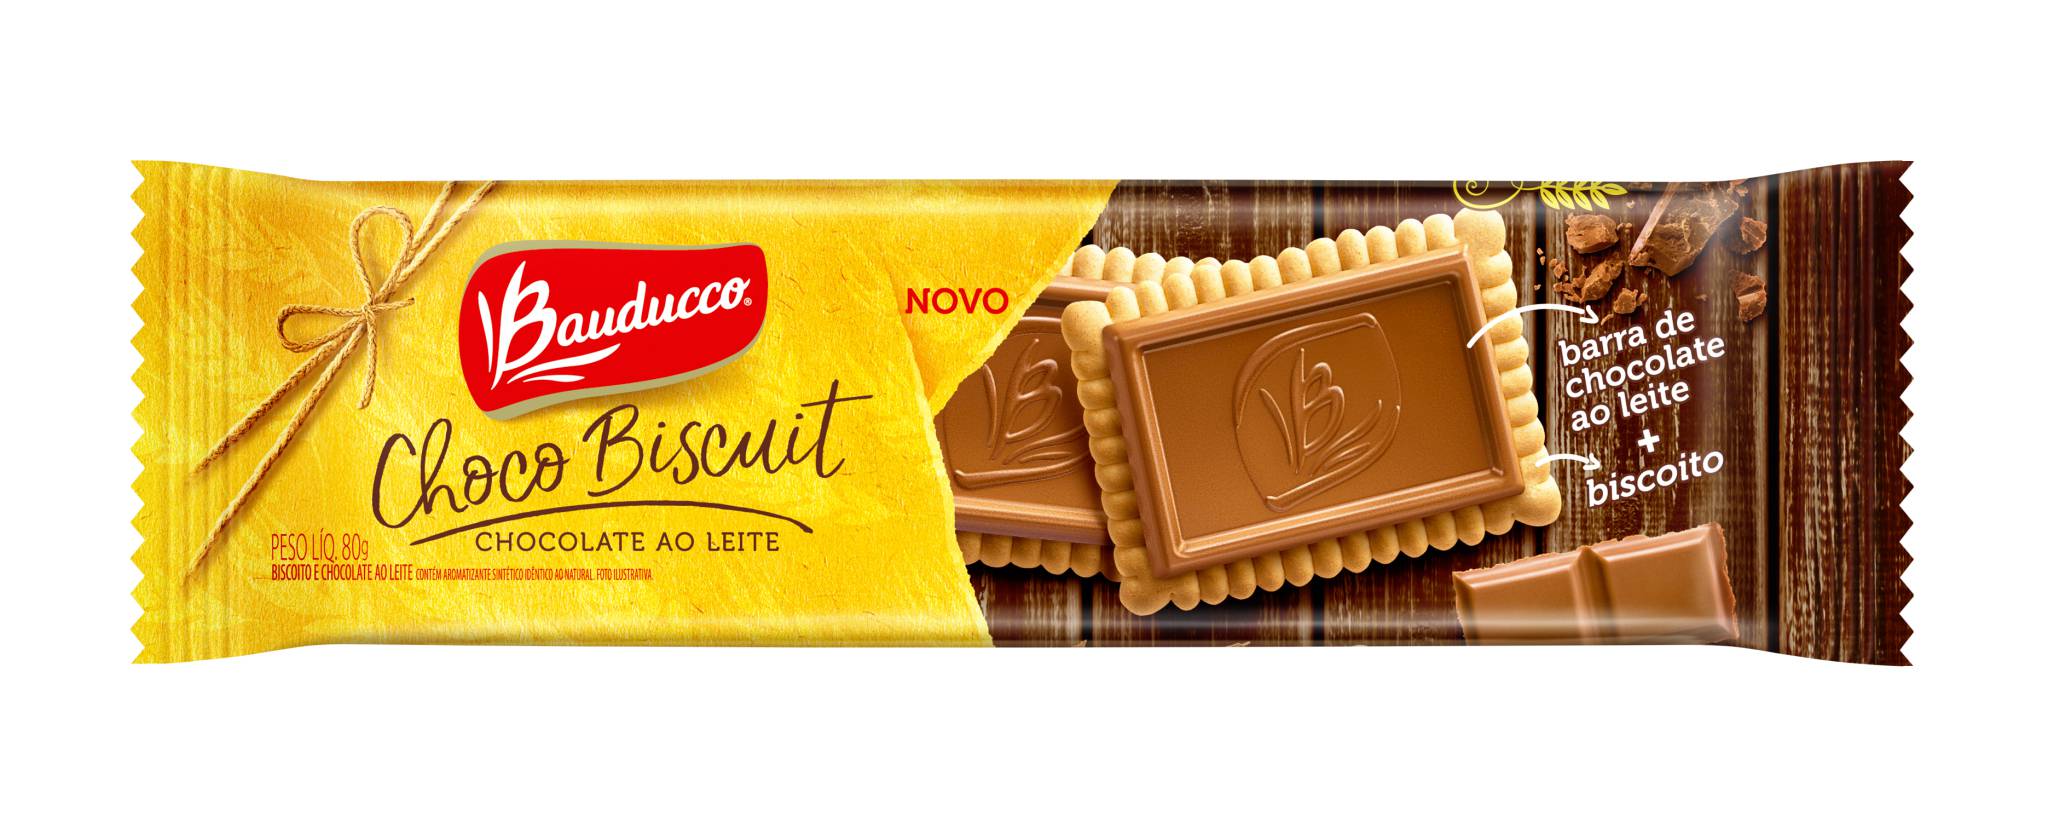 Choco Biscuit Bauducco Chocolate Ao Leite 80g